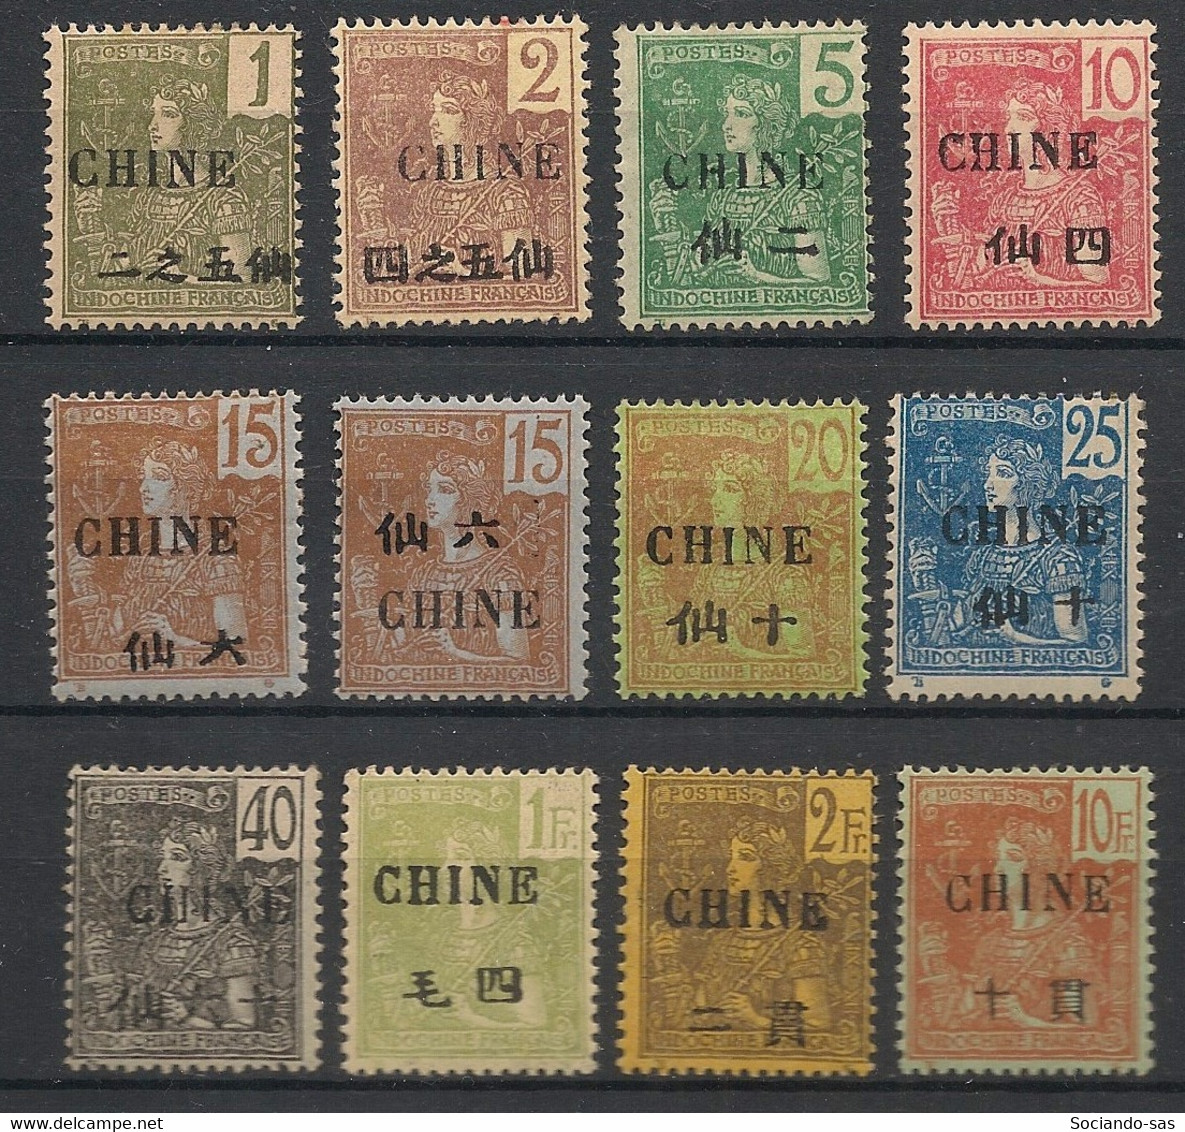 CHINE - 1904-05 - N°Yv. 63 à 74 Sans 64A - Type Grasset - 12 Valeurs - Neuf * / MH VF - Unused Stamps